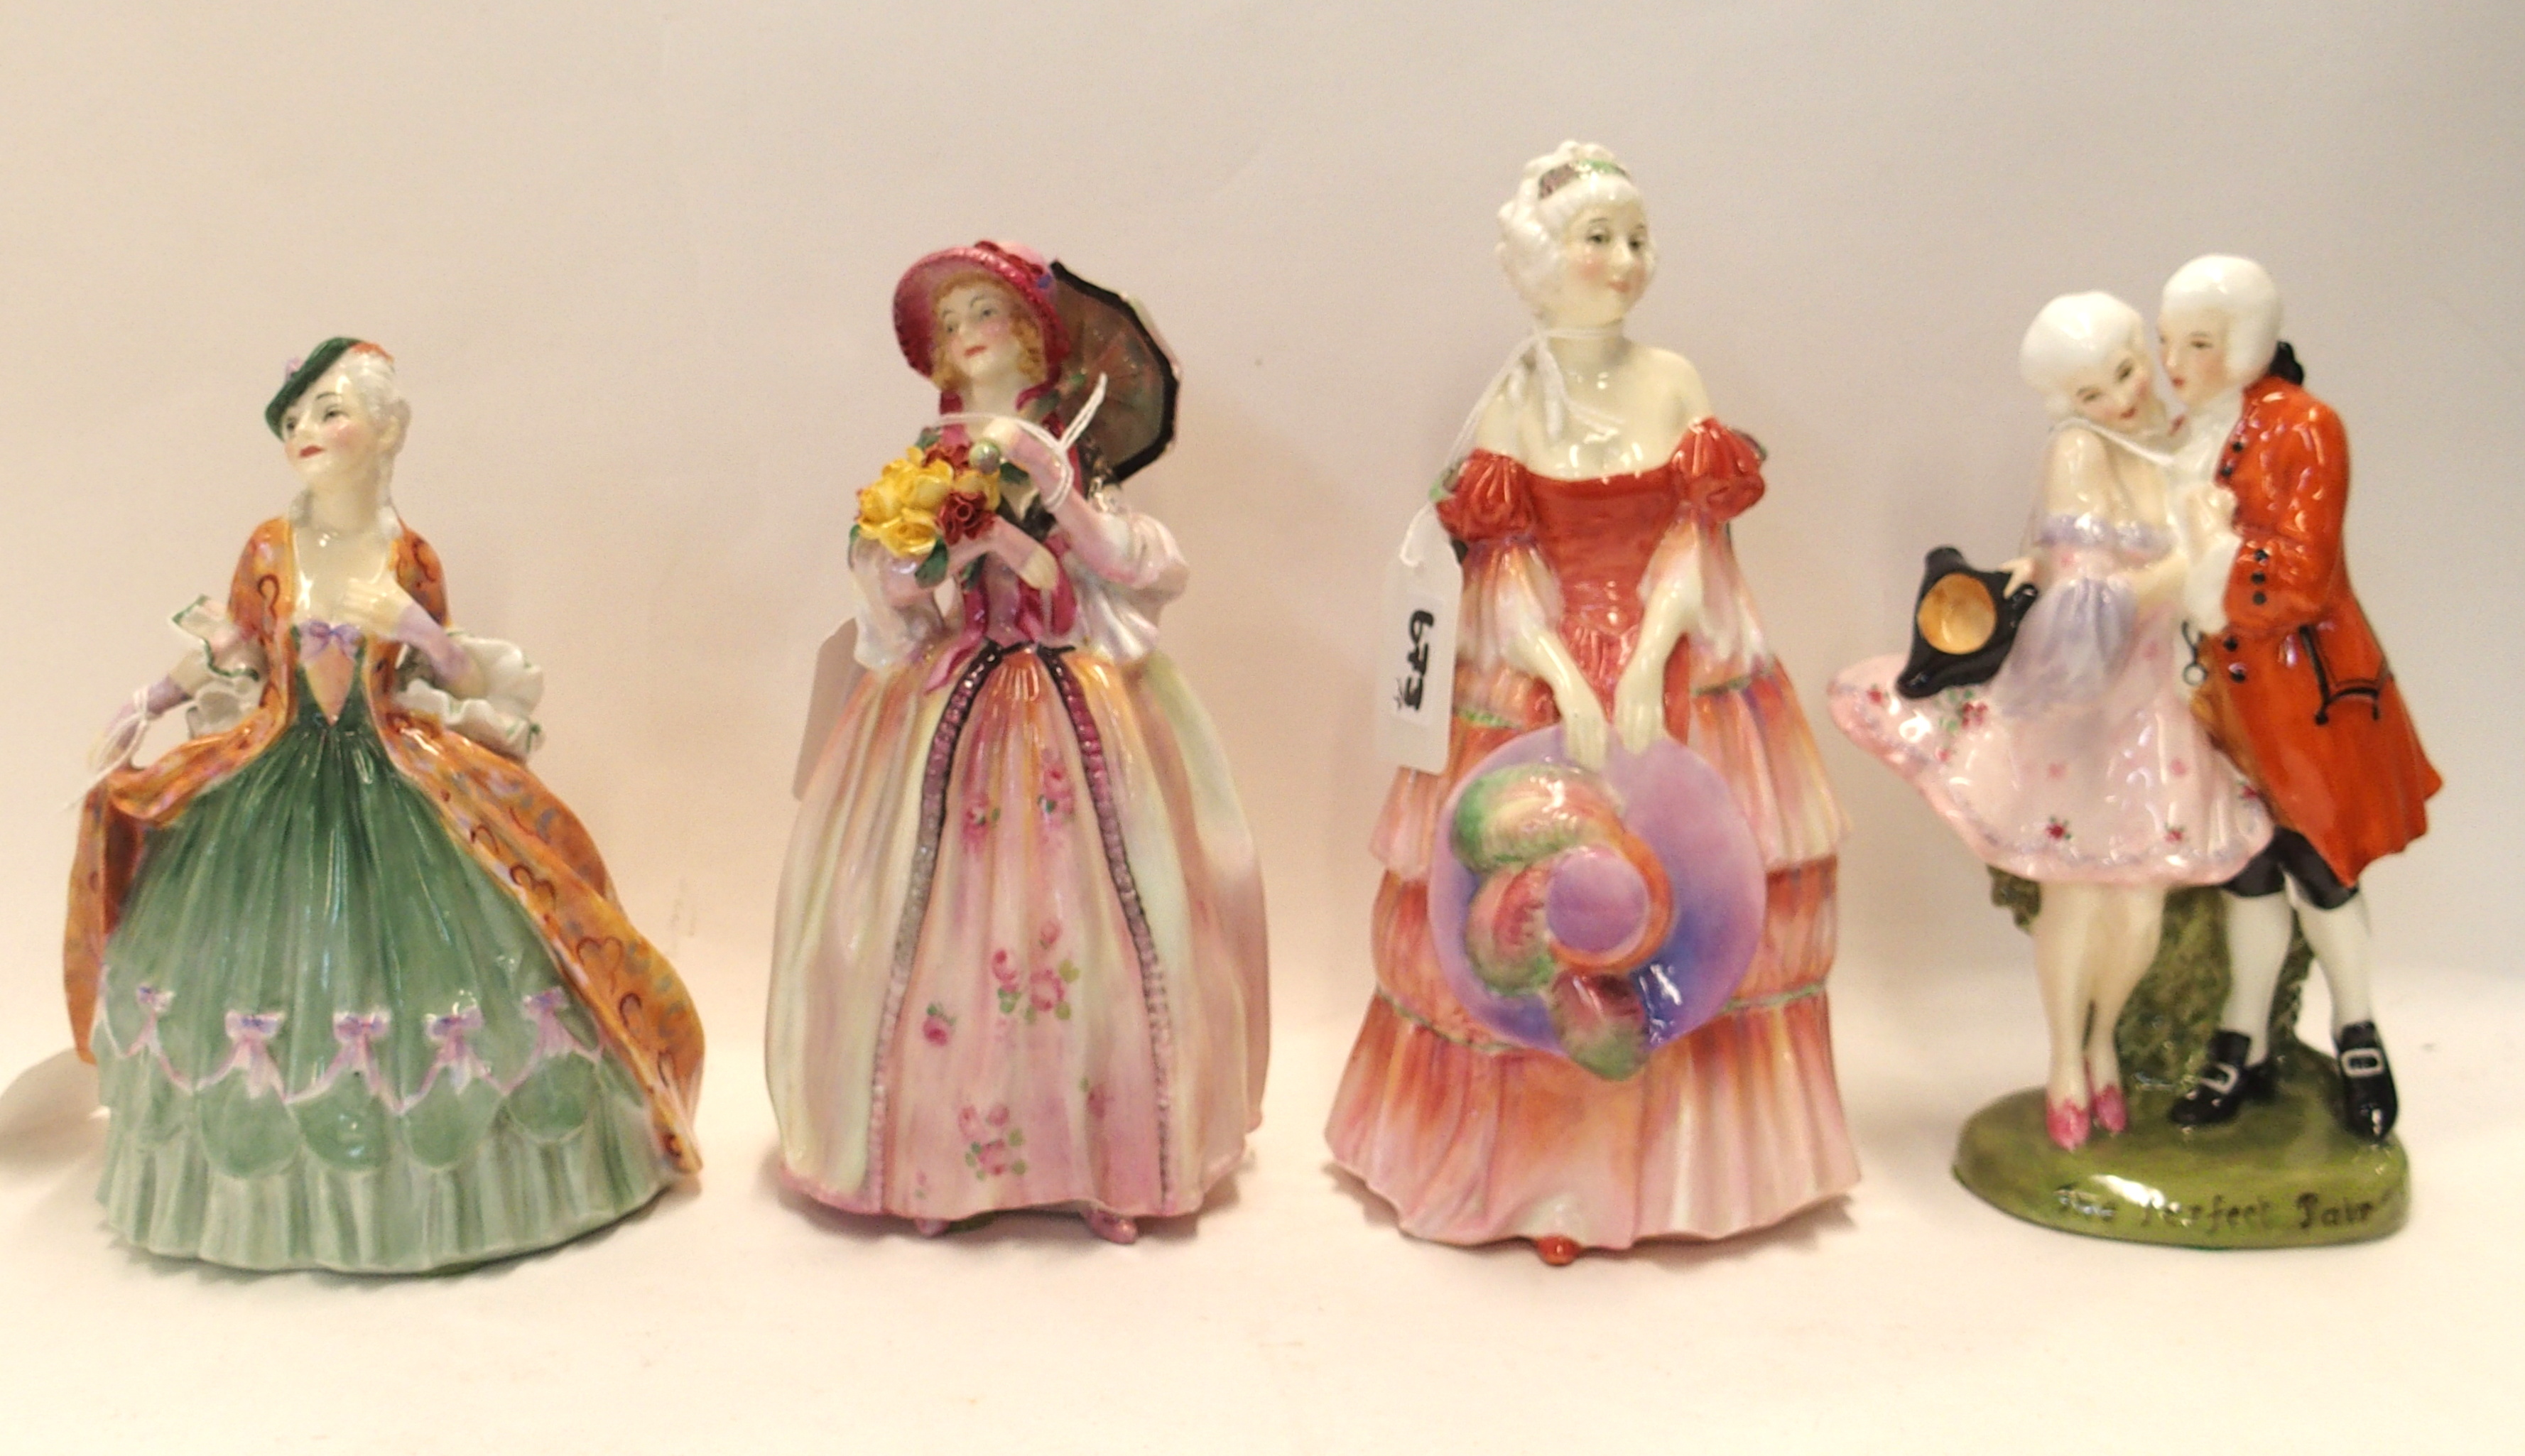 Four Royal Doulton figures including The Perfect Pair, Veronica HN1517, June HN1691 and Sibell